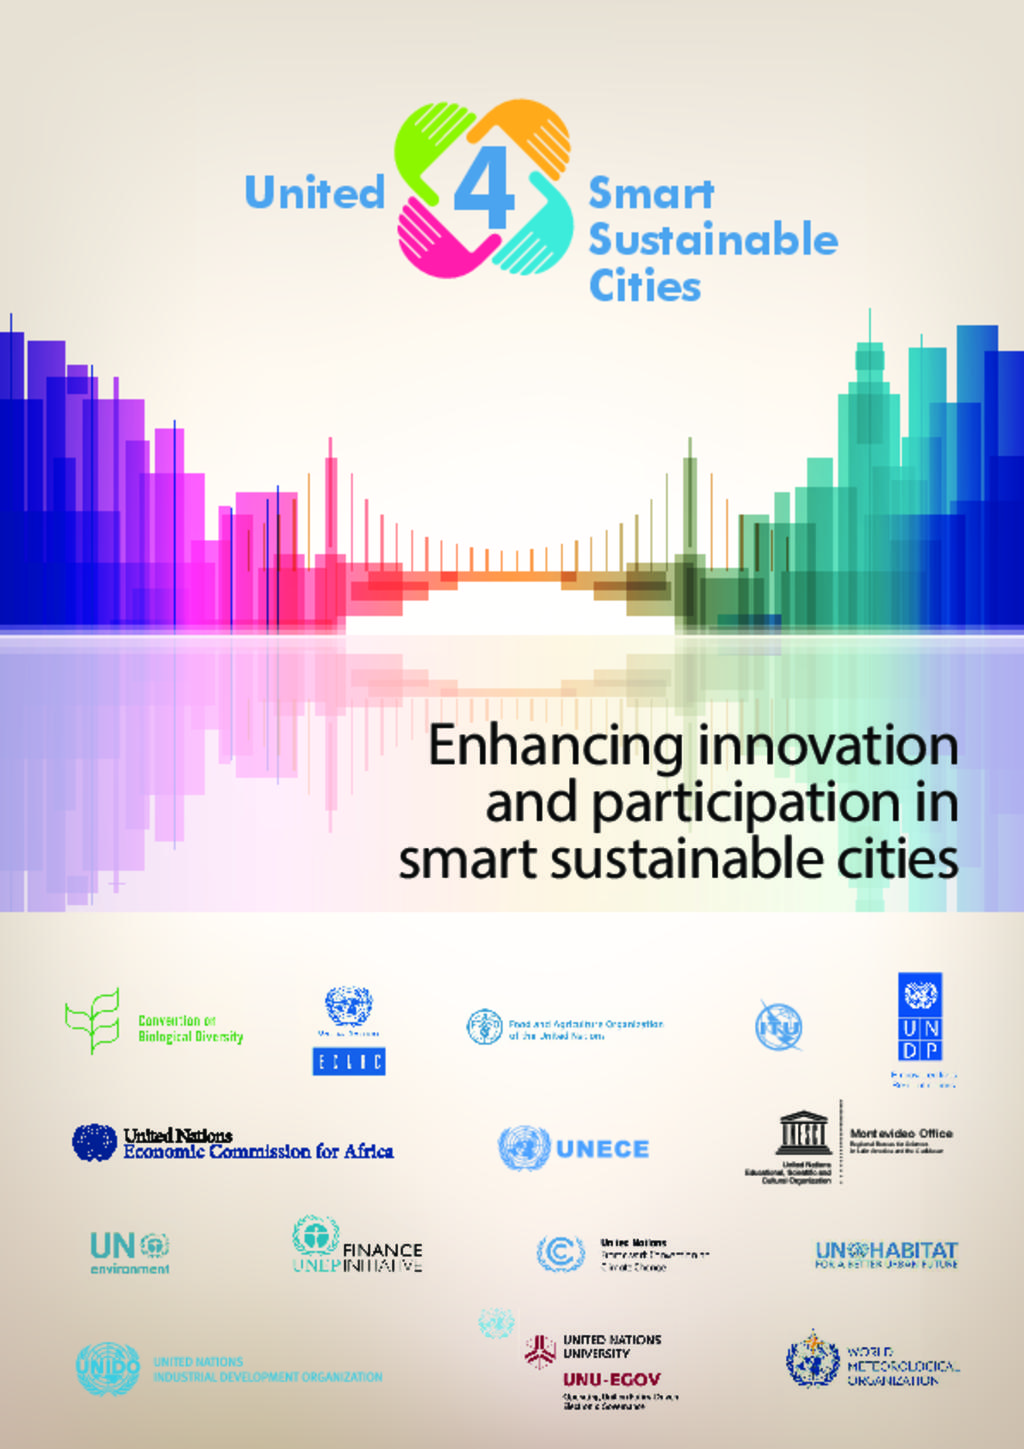 Promoting Innovation in Smart Cities